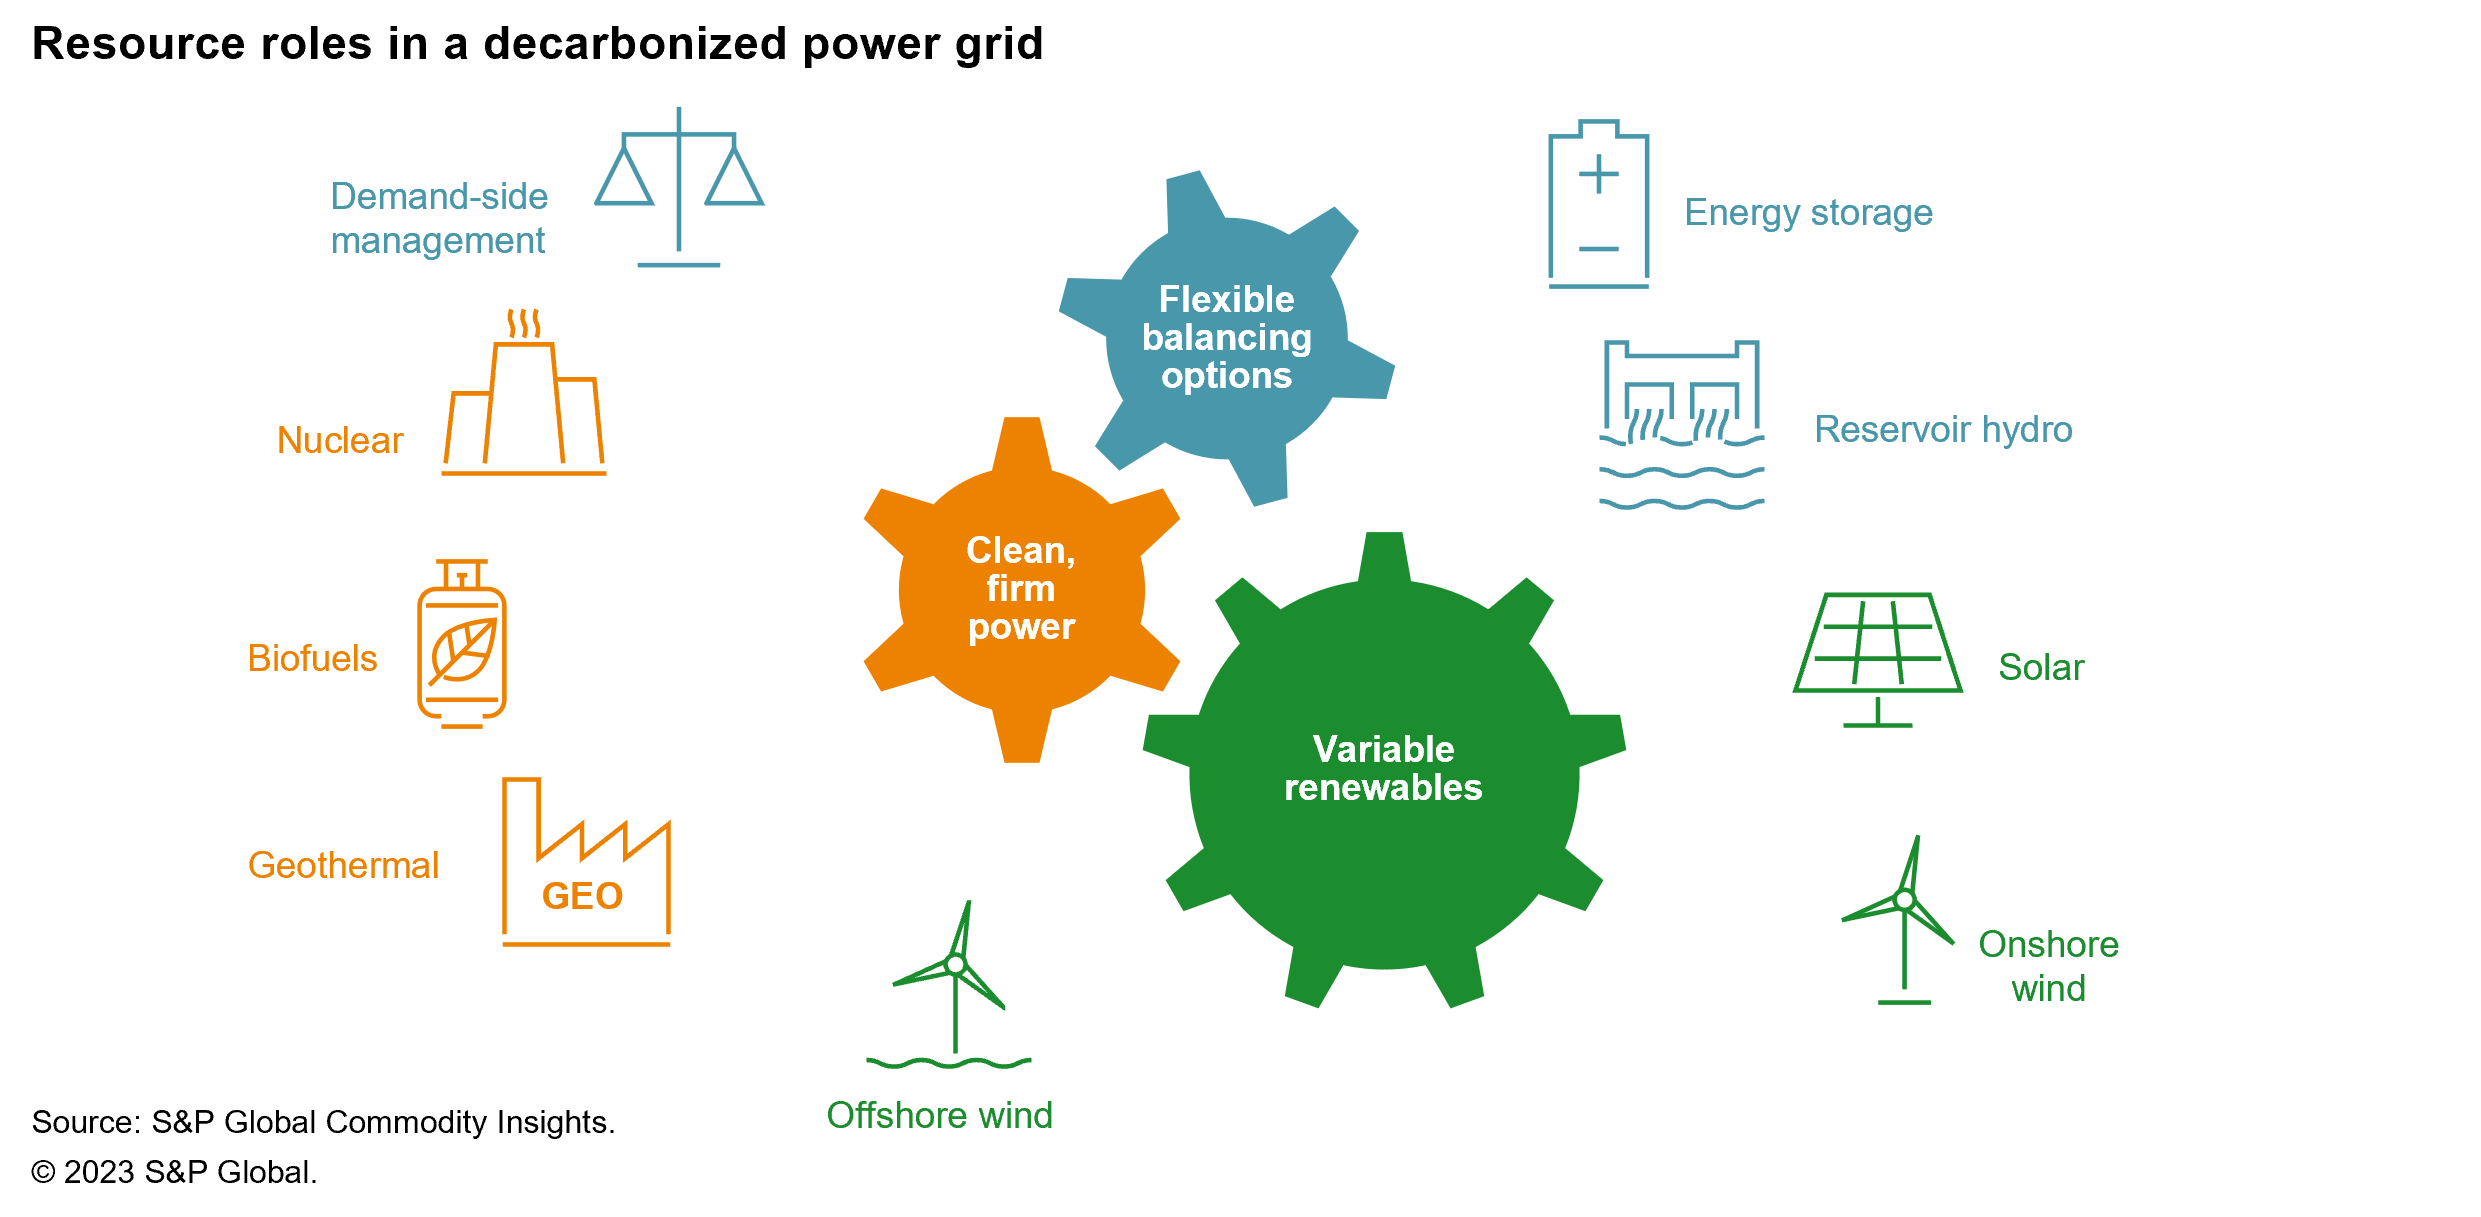 Resources in a decarbonized power grid